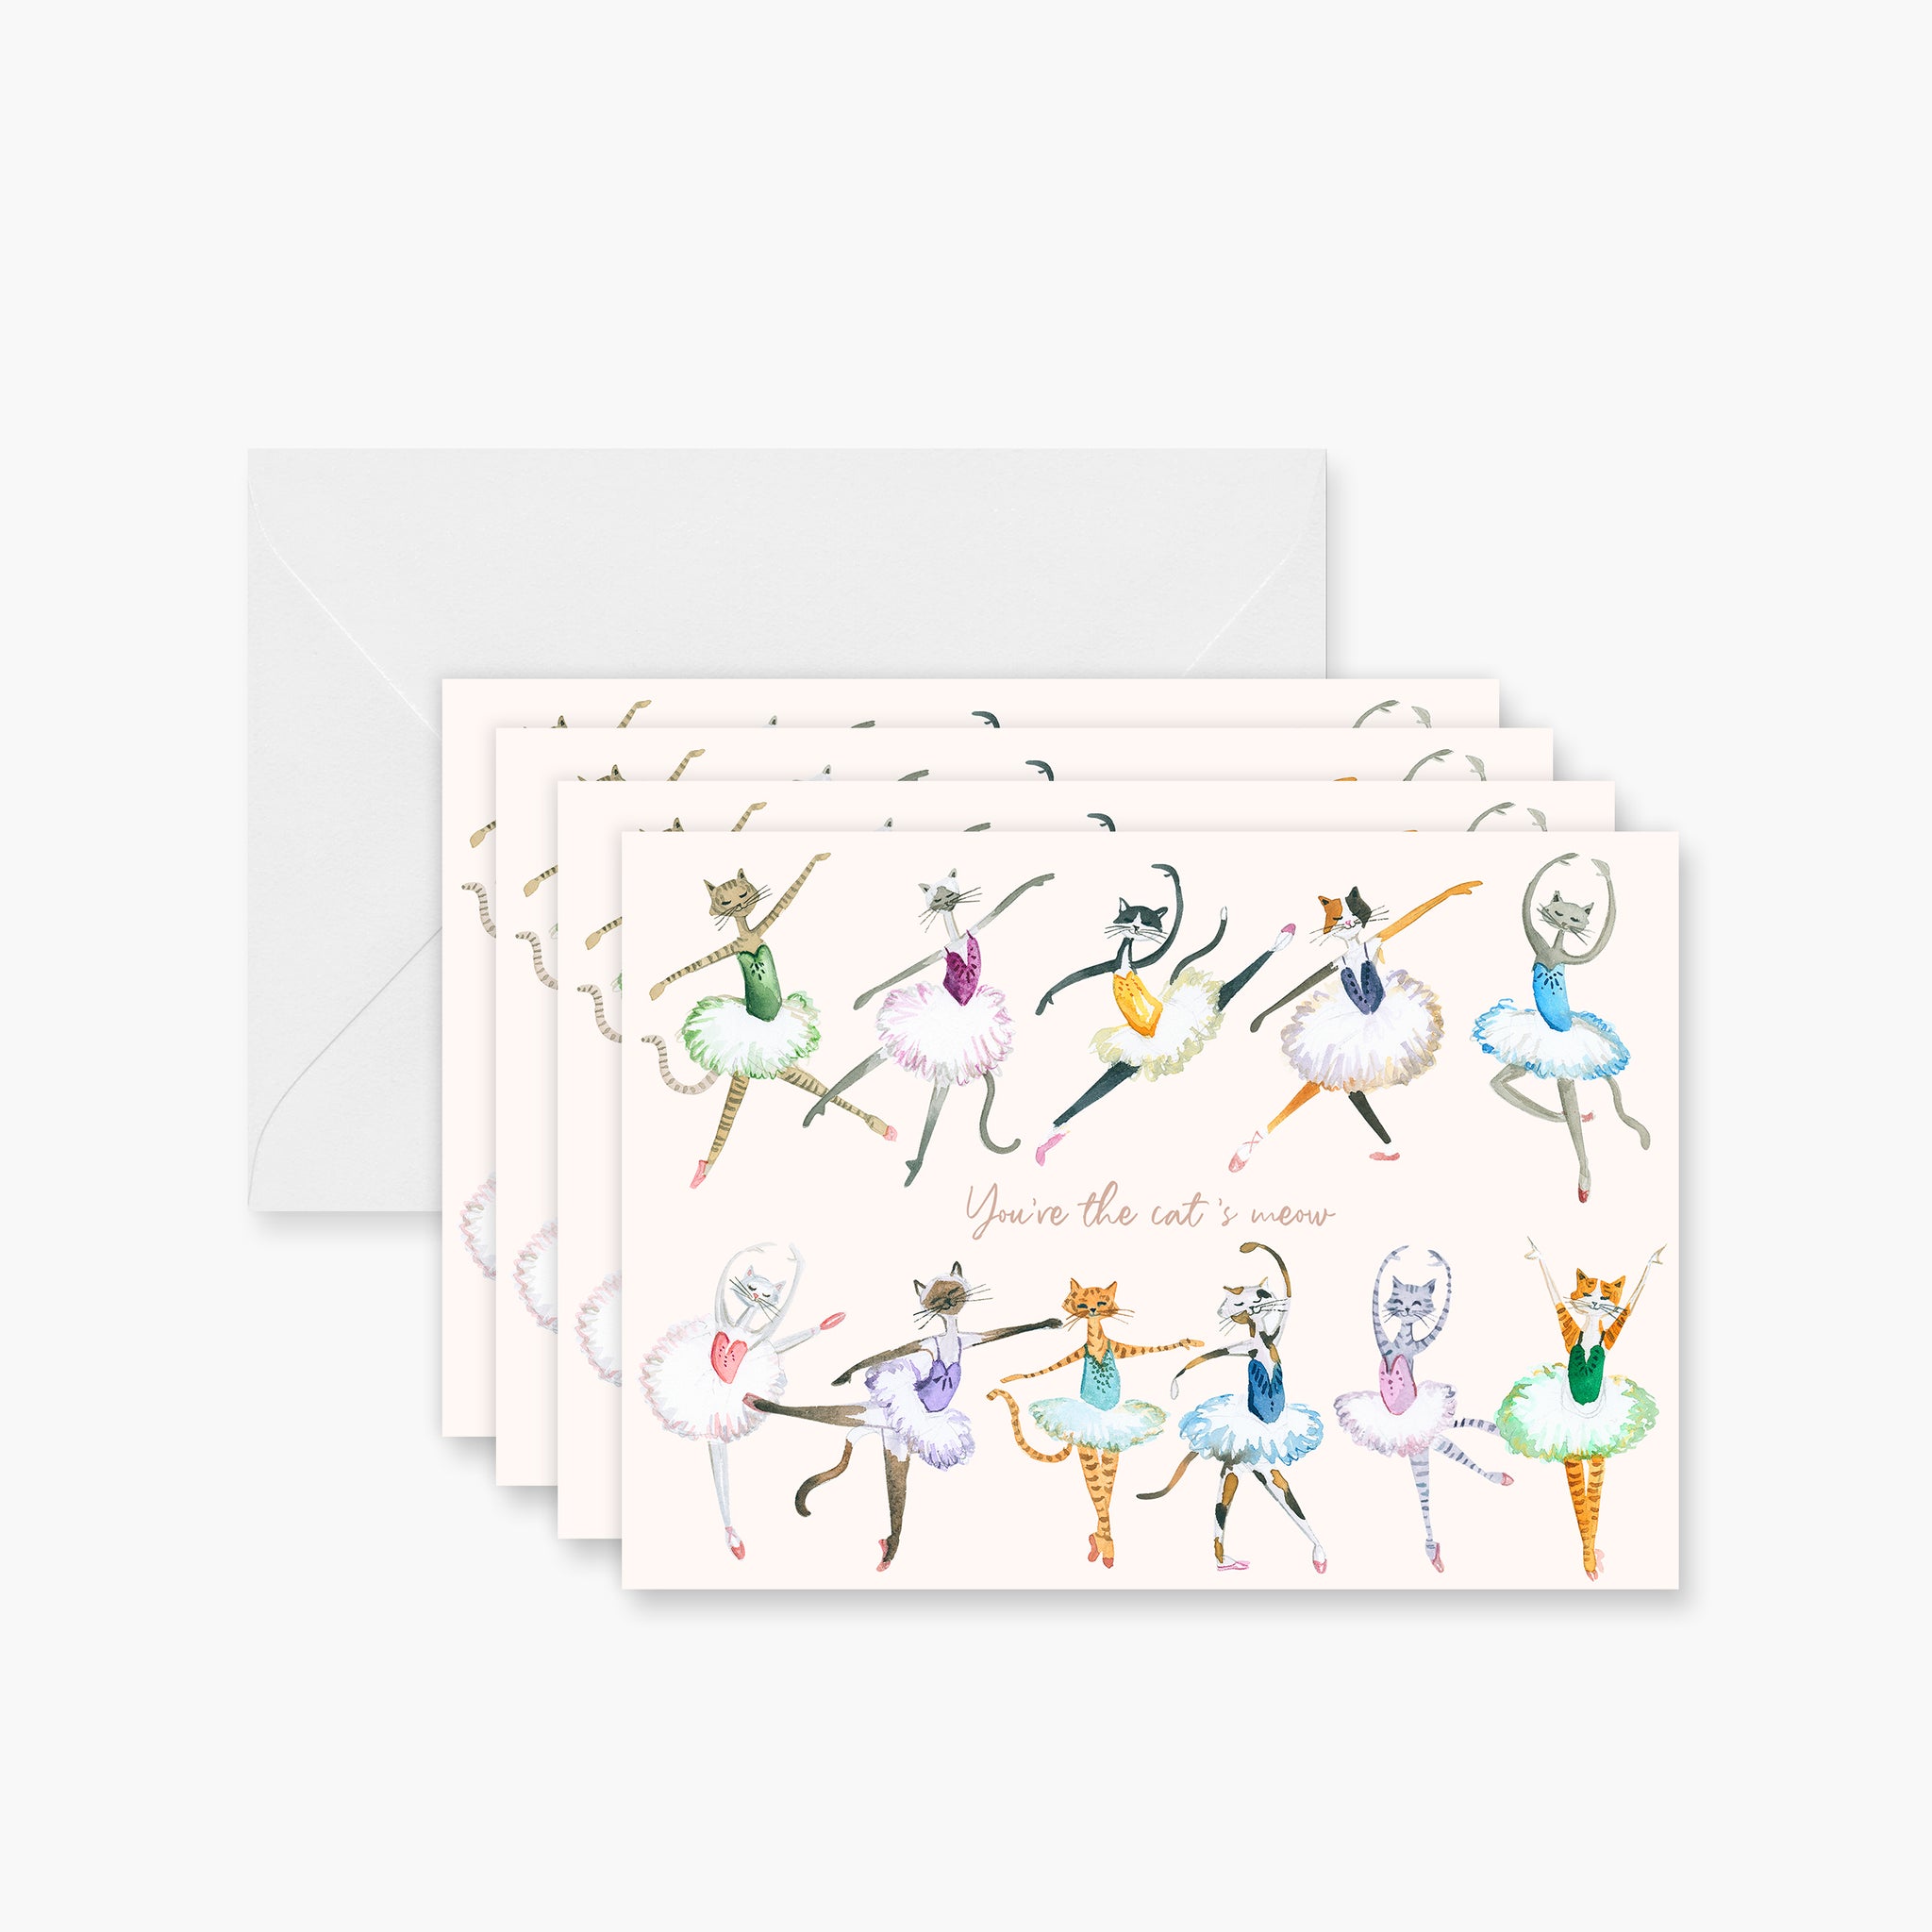 The Cat's Meow Greeting Card Set